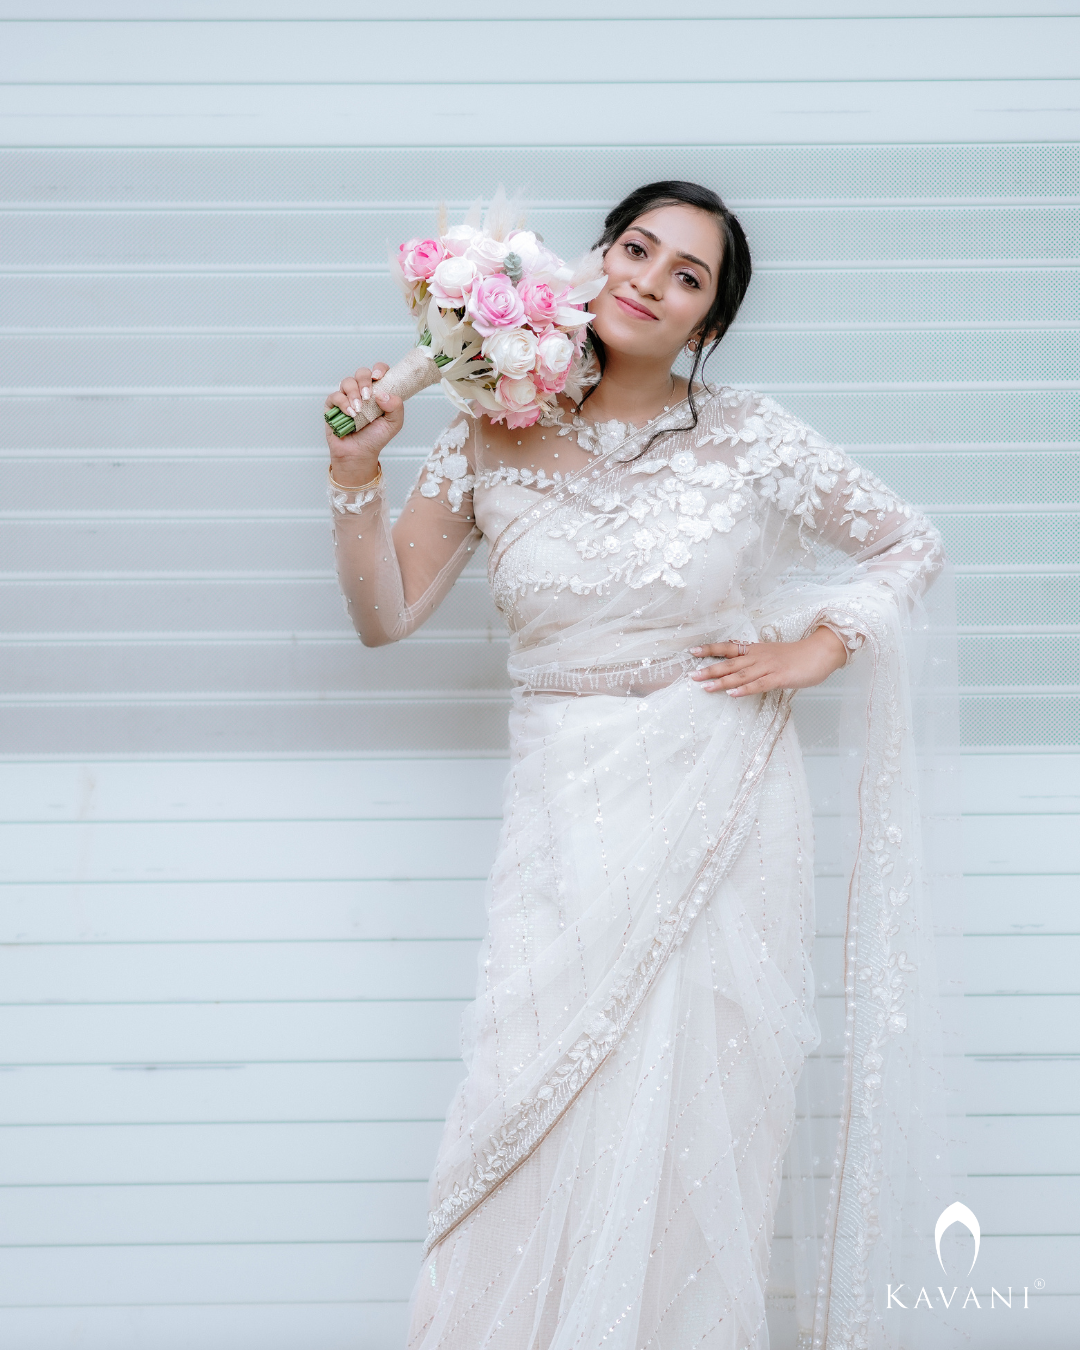 Signature christian bridal saree with intricate lace work and hand embroidery